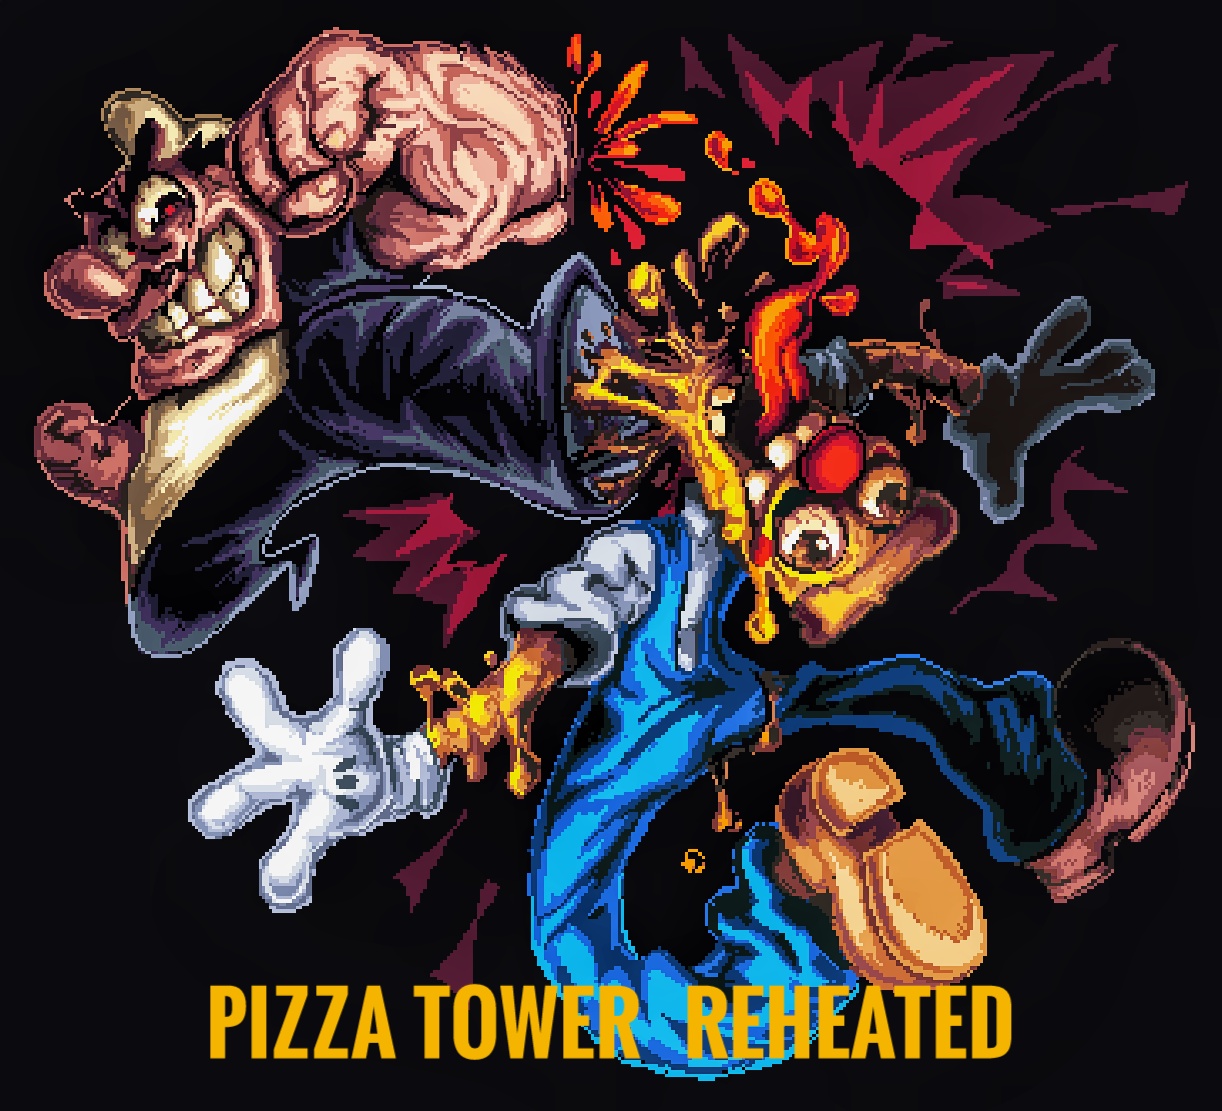 Pizza Tower OST REHEATED (2019) MP3 - Download Pizza Tower OST REHEATED  (2019) Soundtracks for FREE!